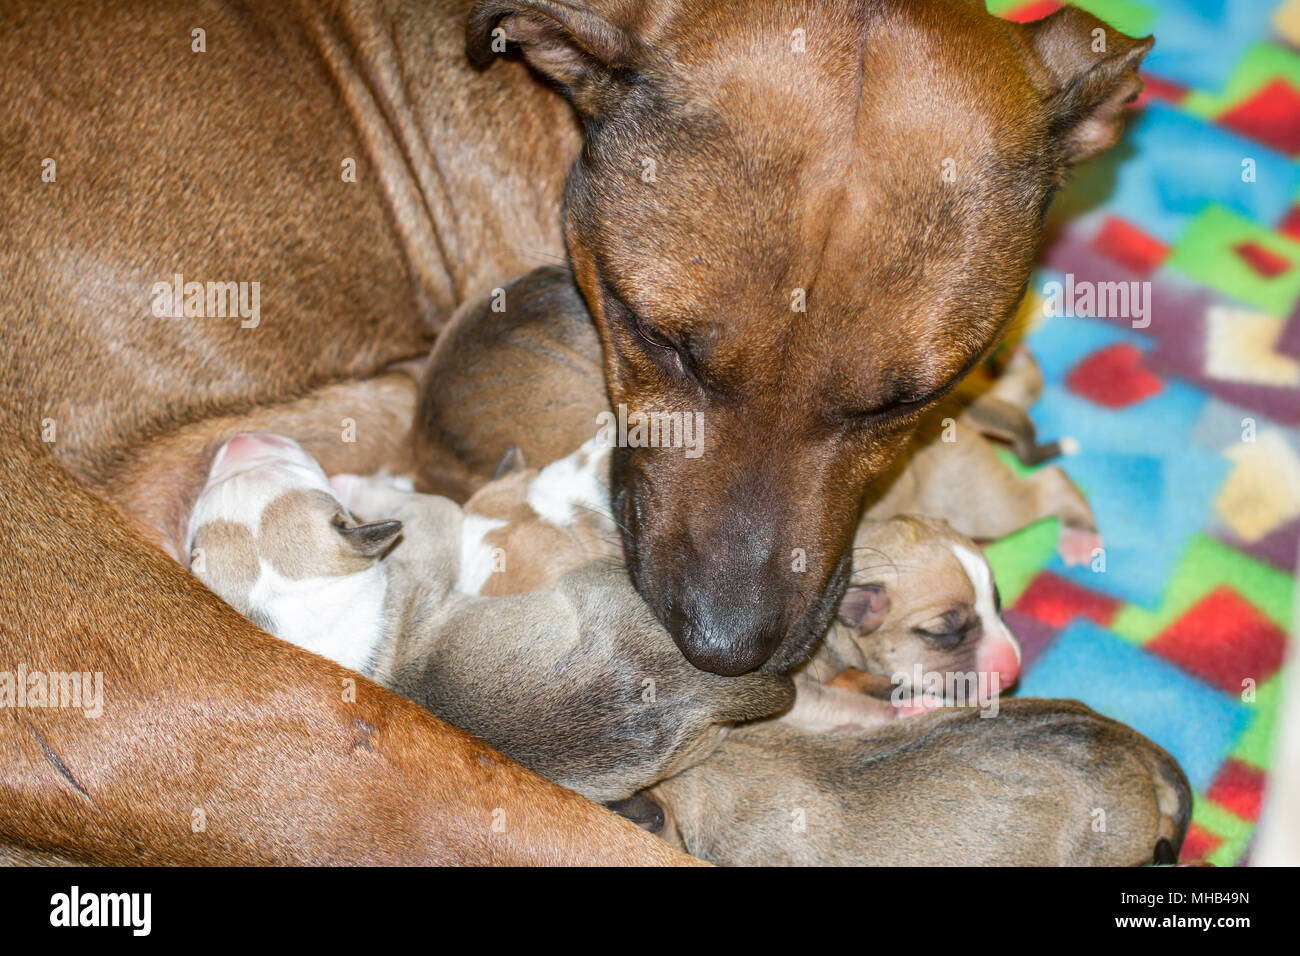 Female dog lactating her newborn puppies in a clean environment Stock Photo